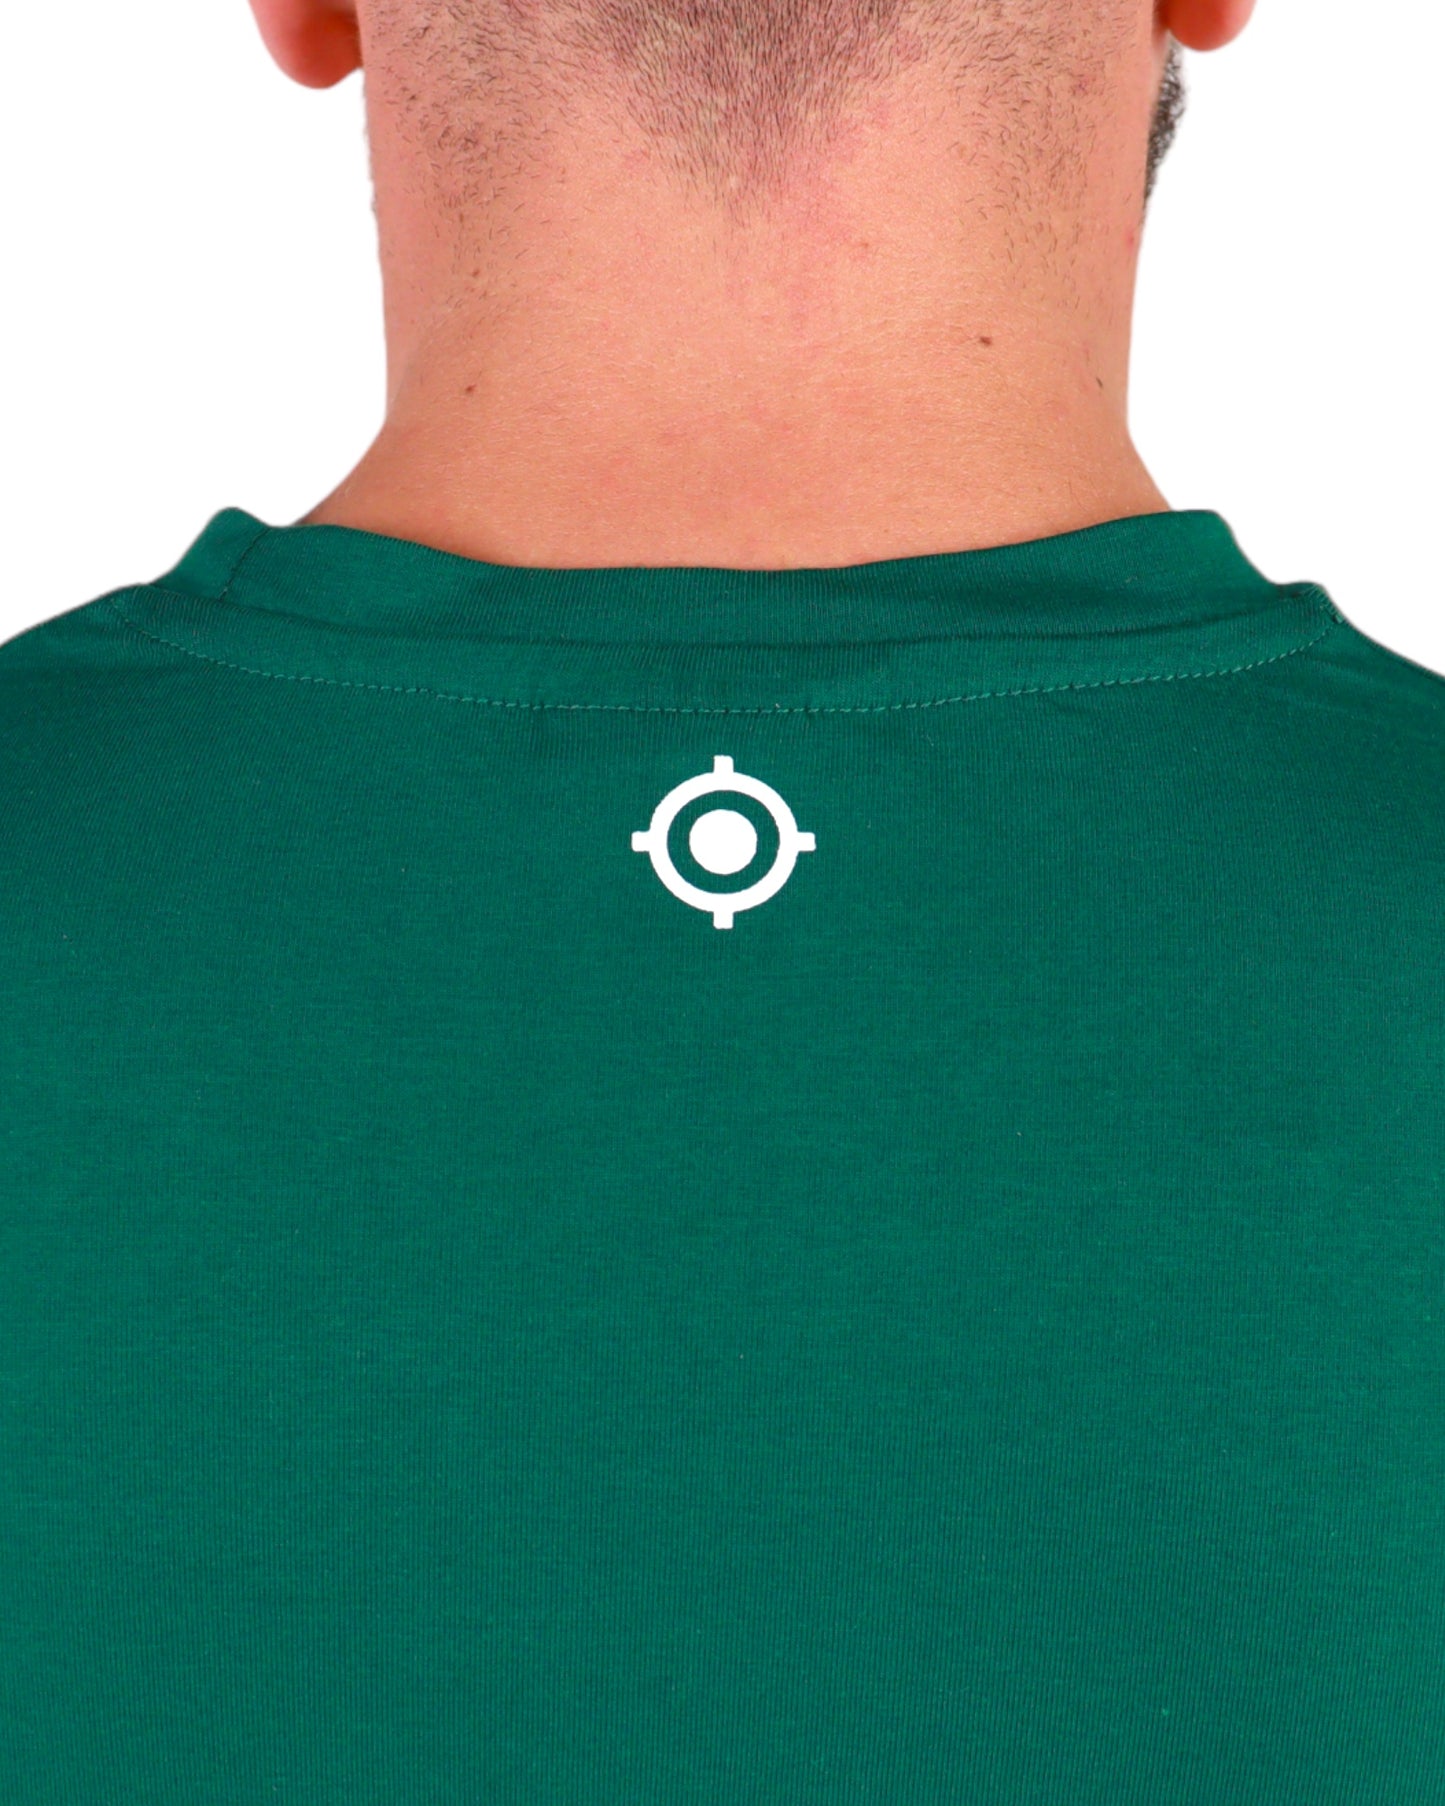 FORREST GREEN ALWAYS A TARGET BADGED TEE